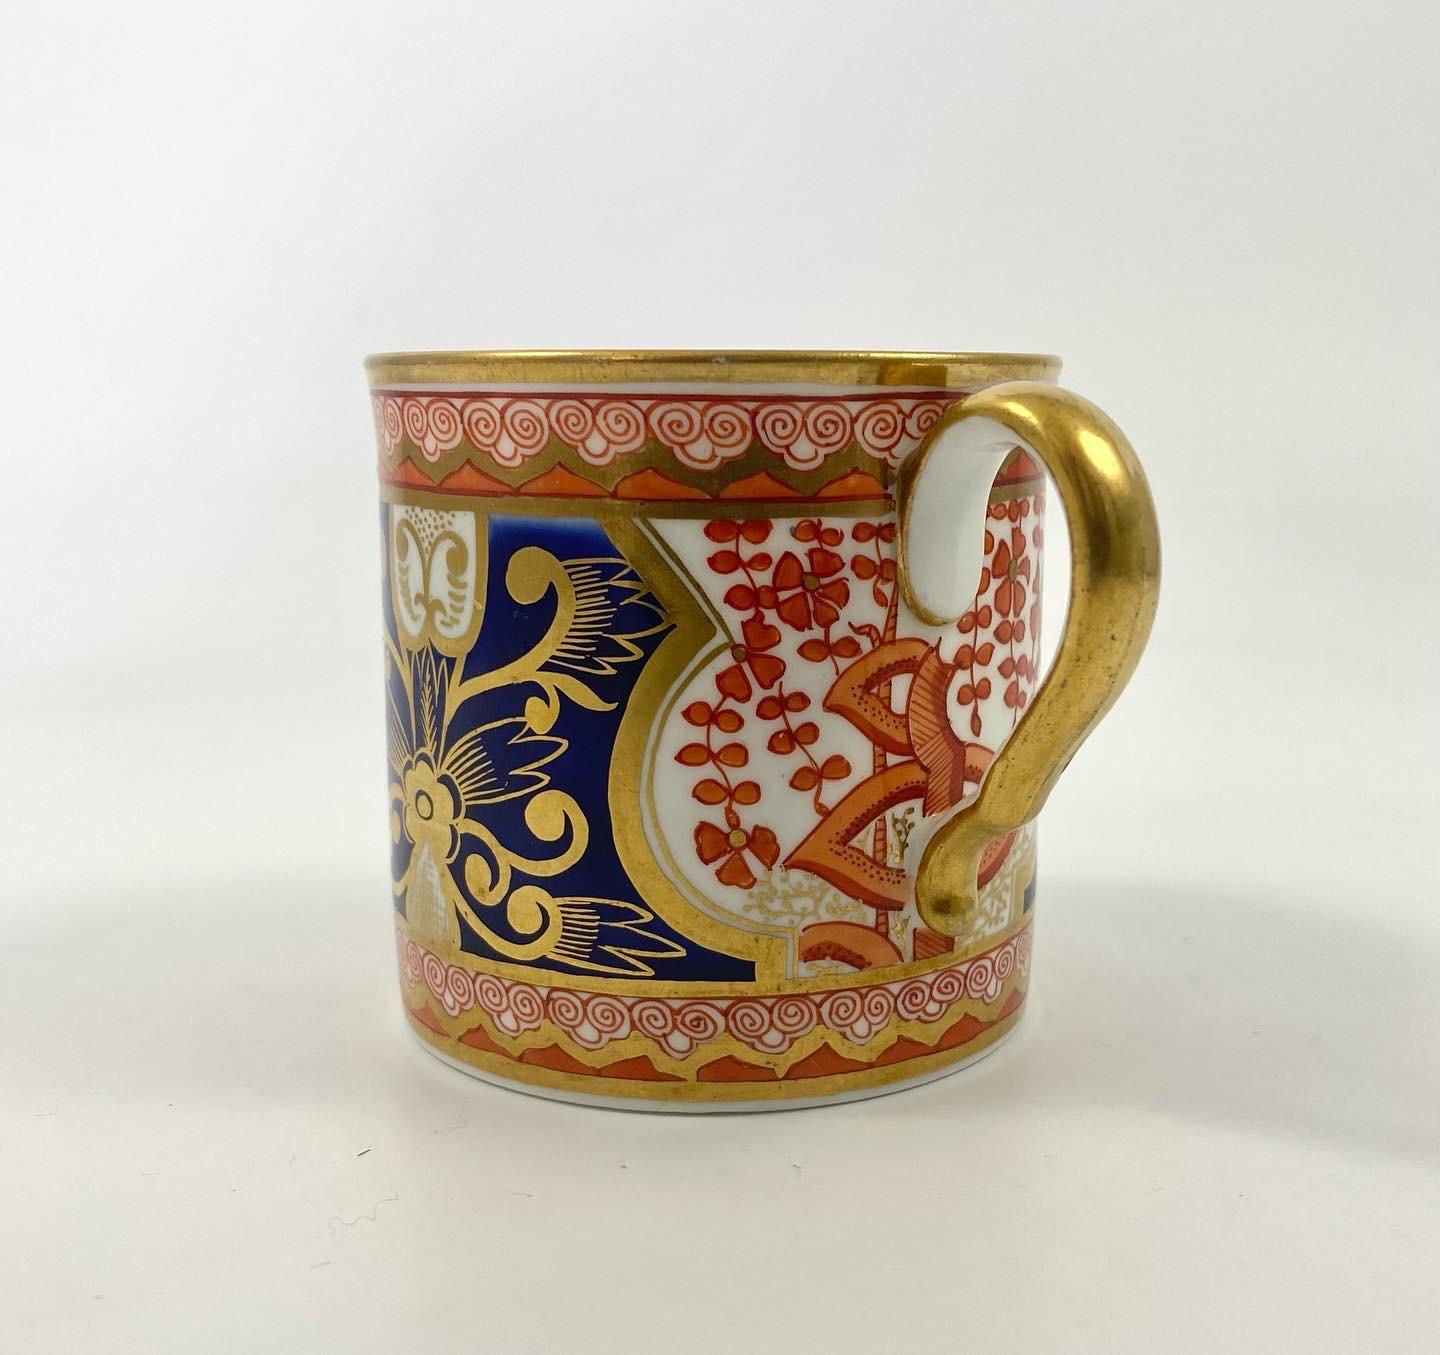 Early 19th Century Spode Porcelain Coffee Can, Imari Pattern, c. 1810